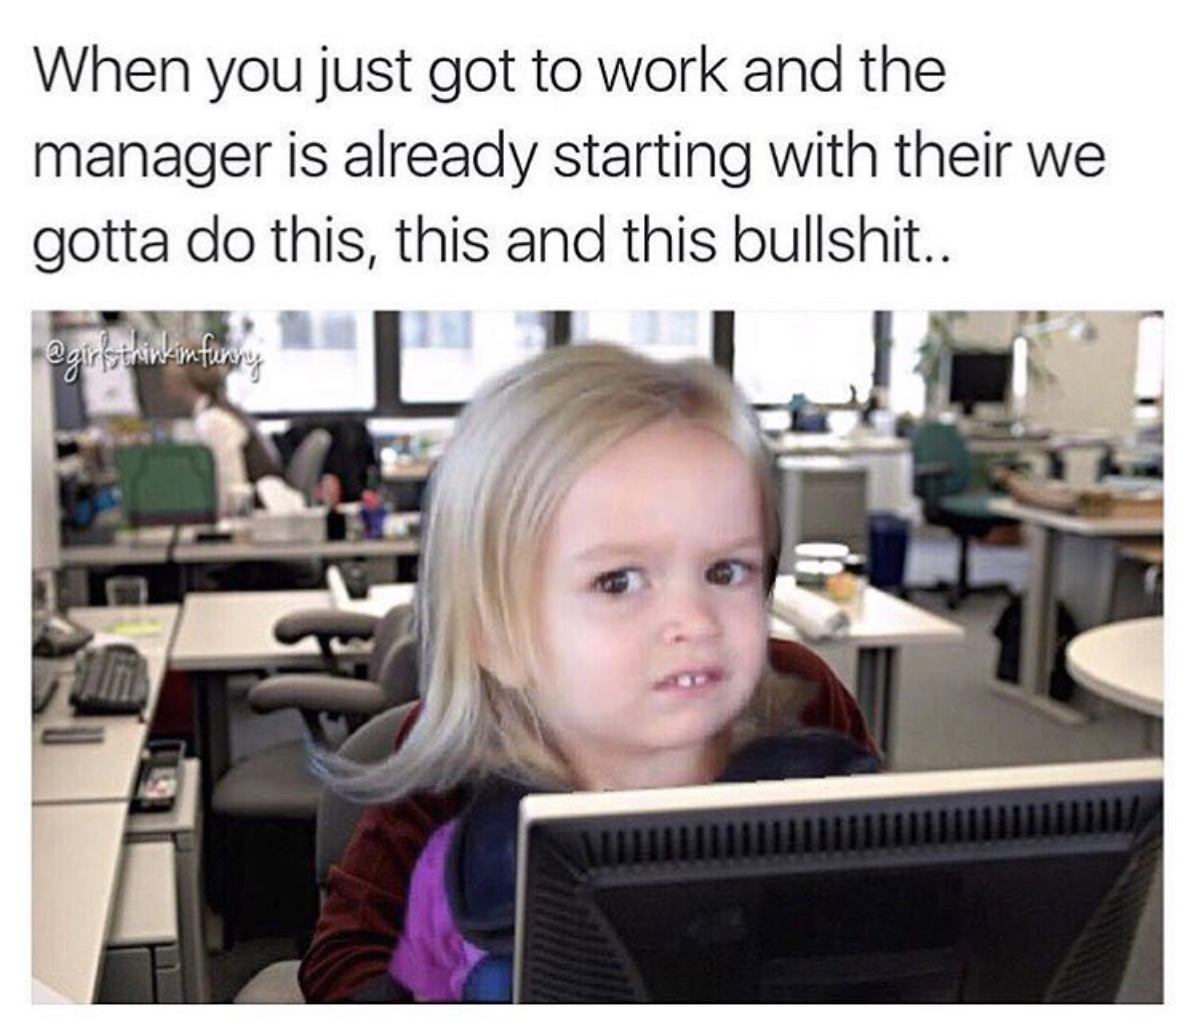 you are interrupted every time you sit down to chart - When you just got to work and the manager is already starting with their we gotta do this, this and this bullshit.. stokimfurry